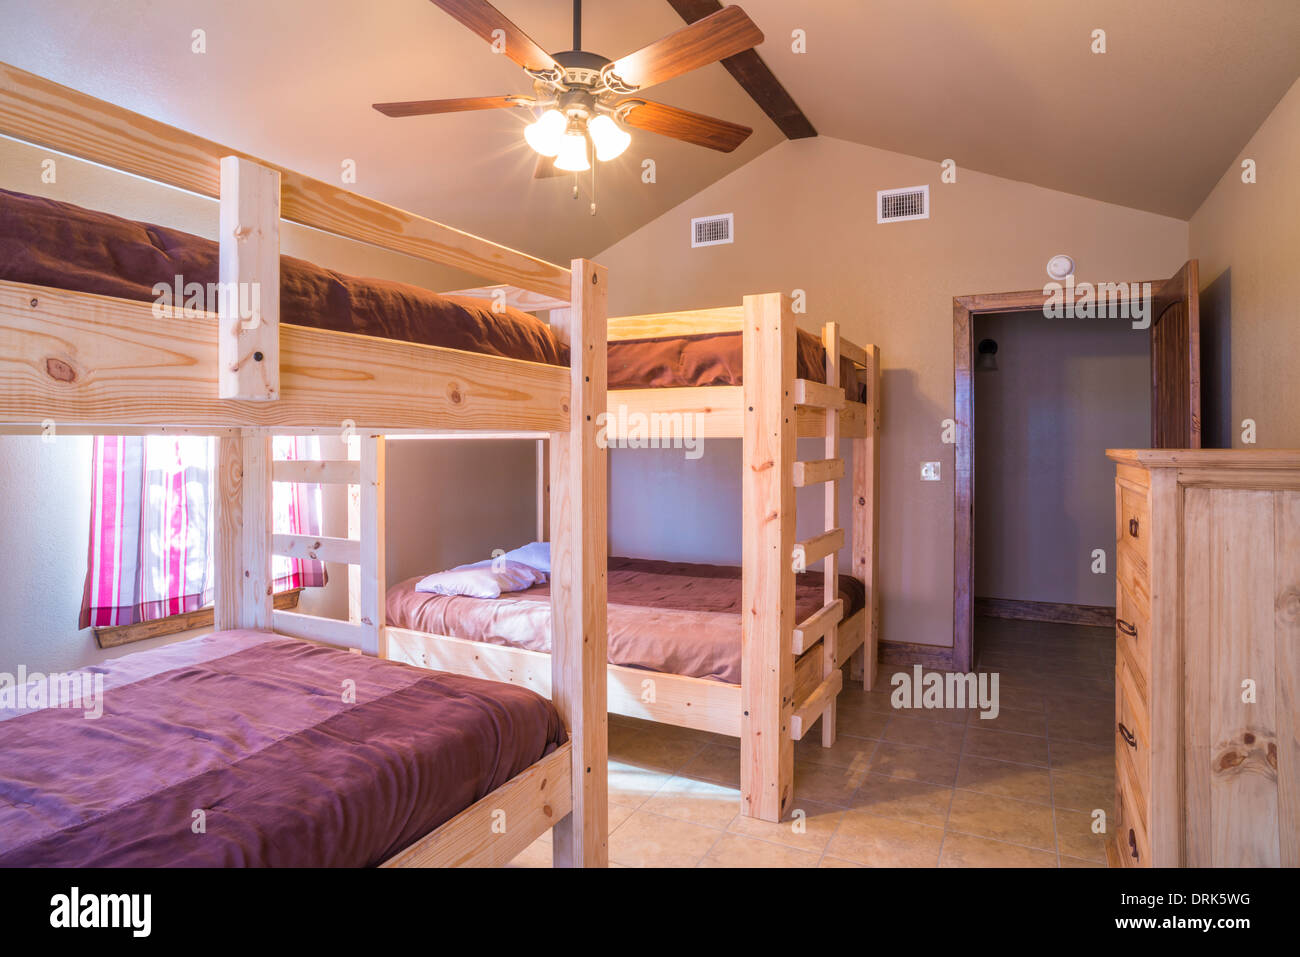 USA, Texas, bedroom interior with double bunk beds Stock Photo